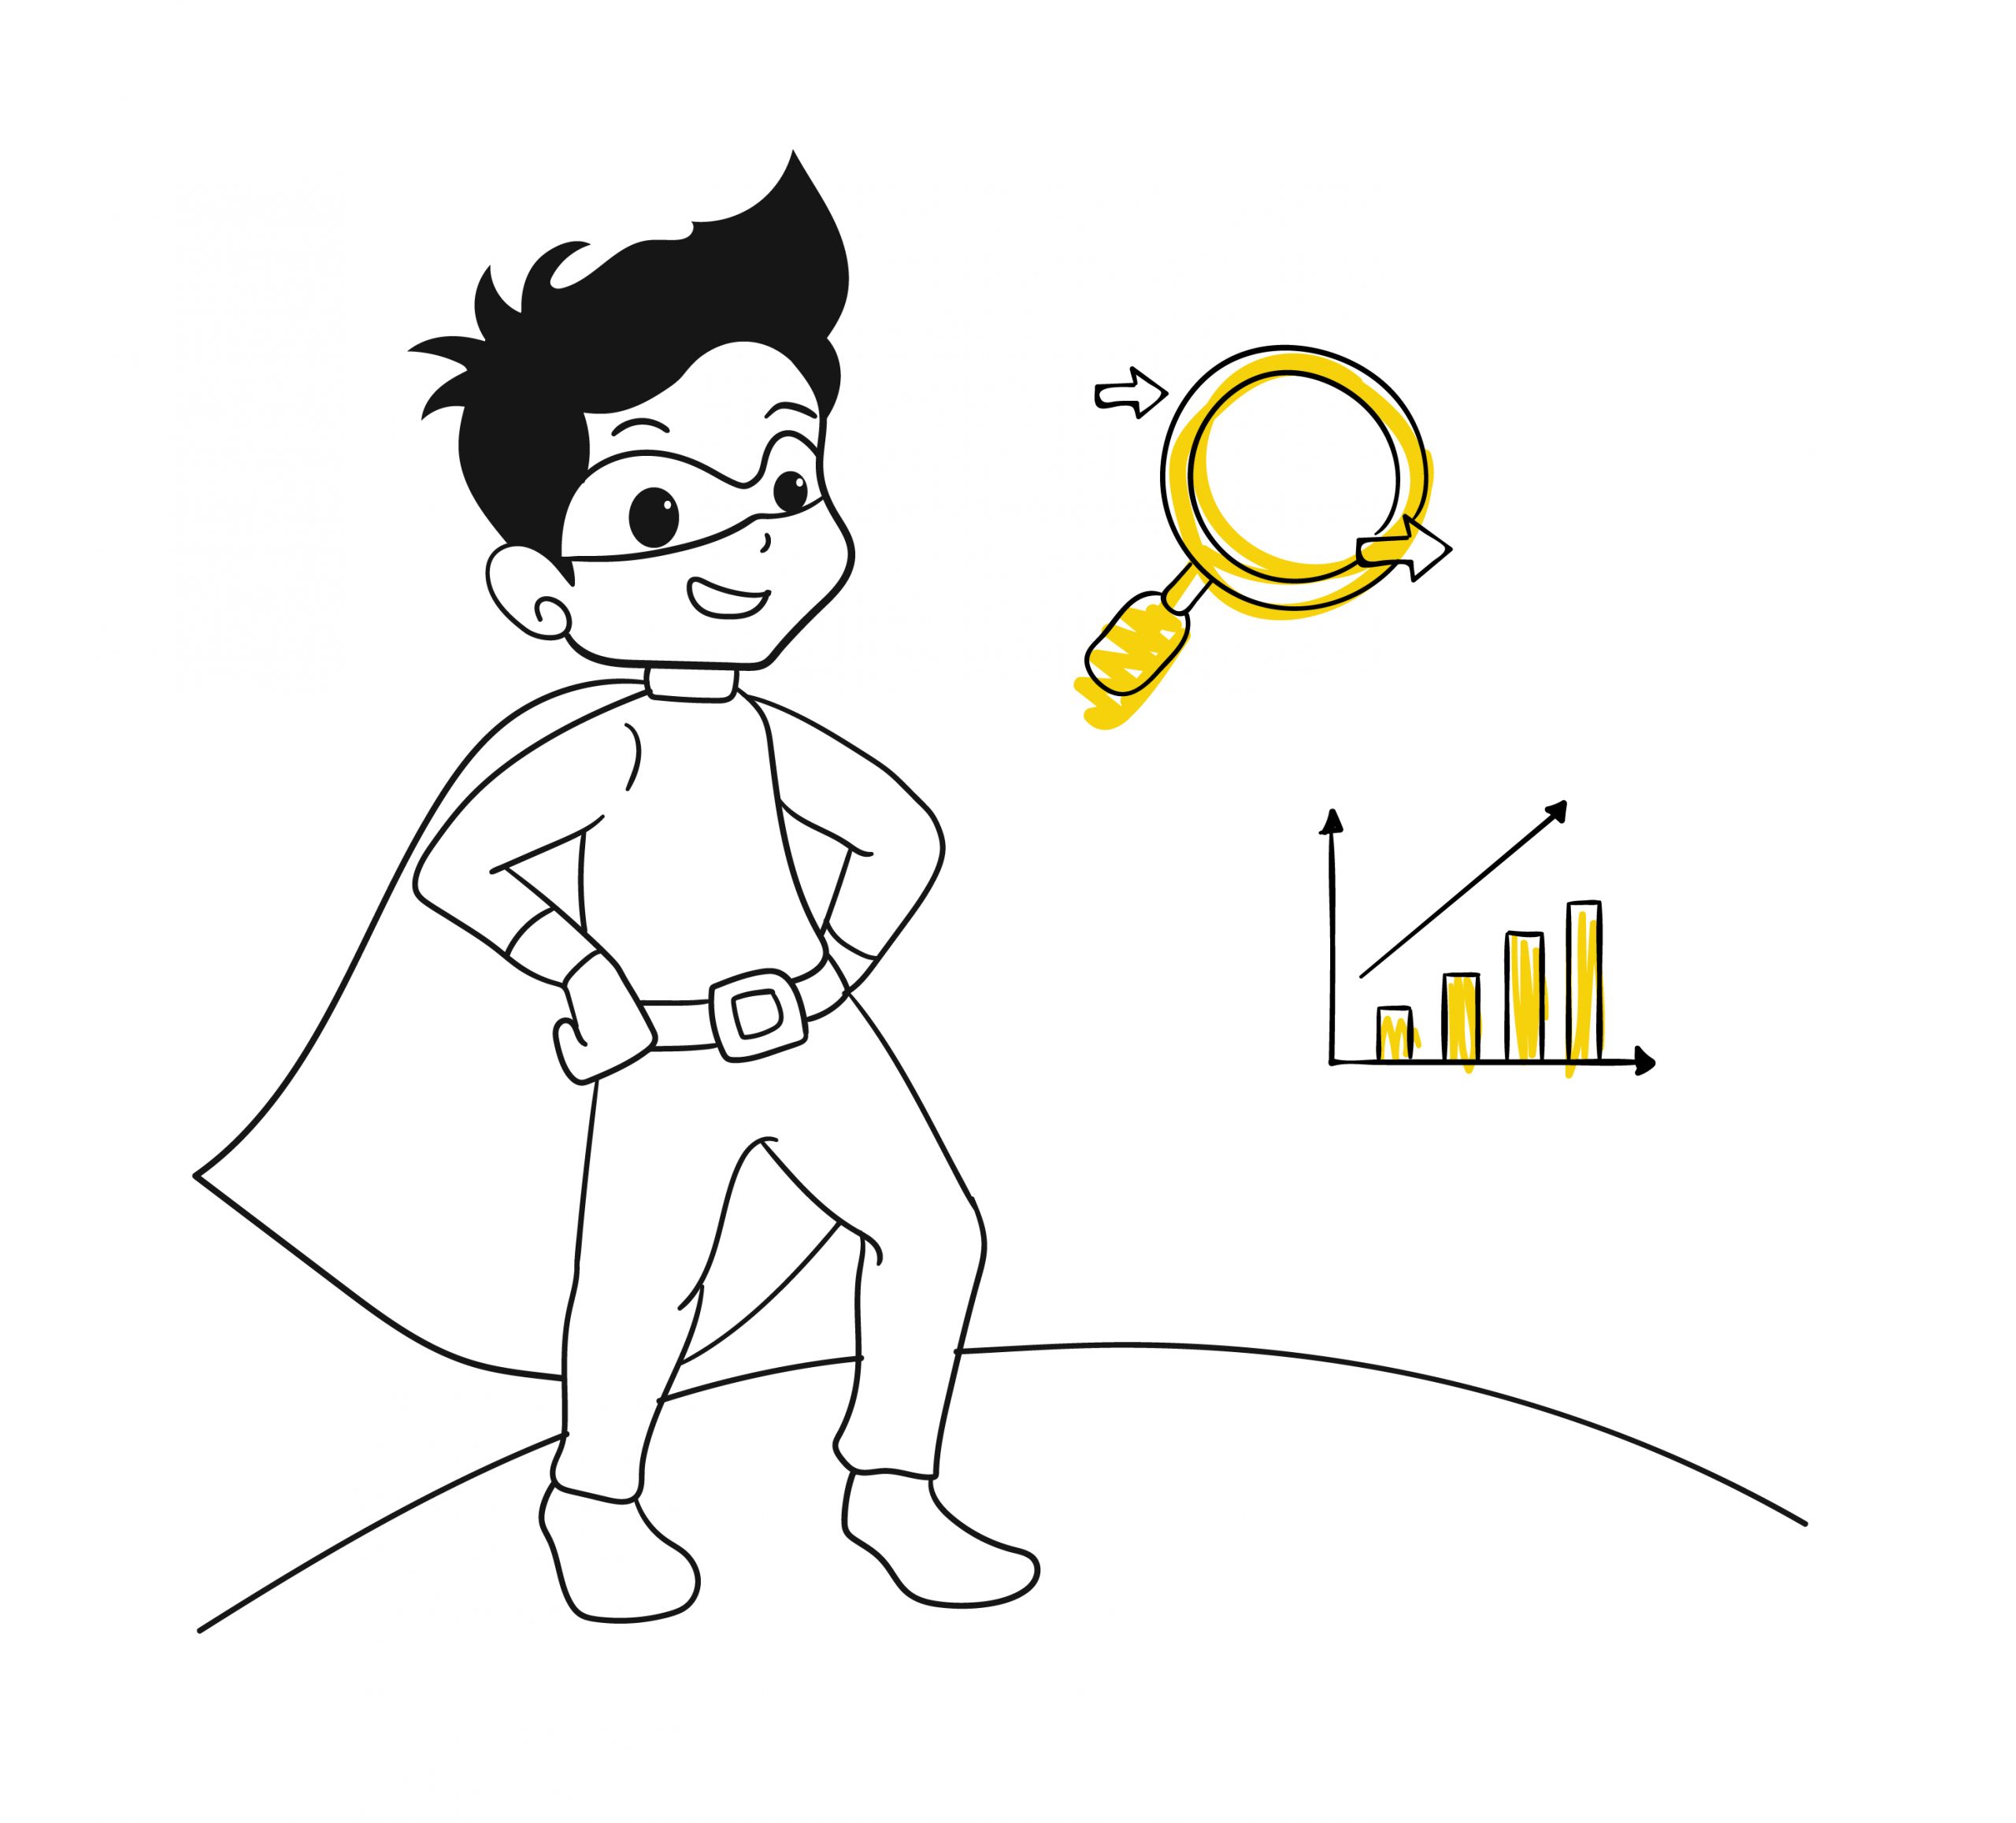 A cartoon boy in a superhero costume, with a magnifying glass, ready to solve mysteries